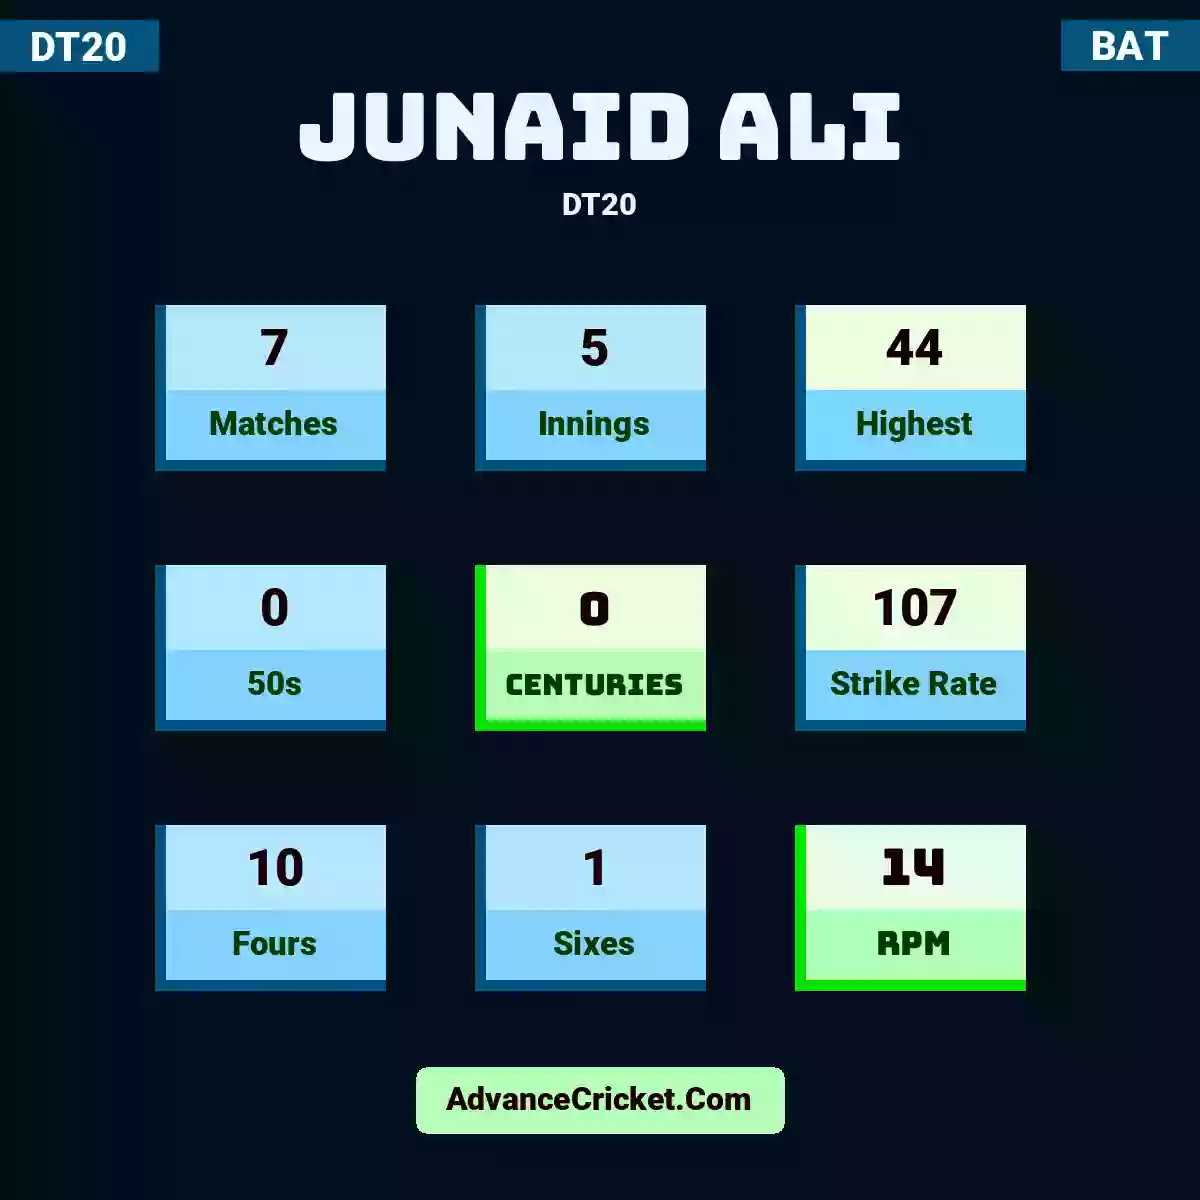 Junaid Ali DT20 , Junaid Ali played 7 matches, scored 44 runs as highest, 0 half-centuries, and 0 centuries, with a strike rate of 107. J.Ali hit 10 fours and 1 sixes, with an RPM of 14.